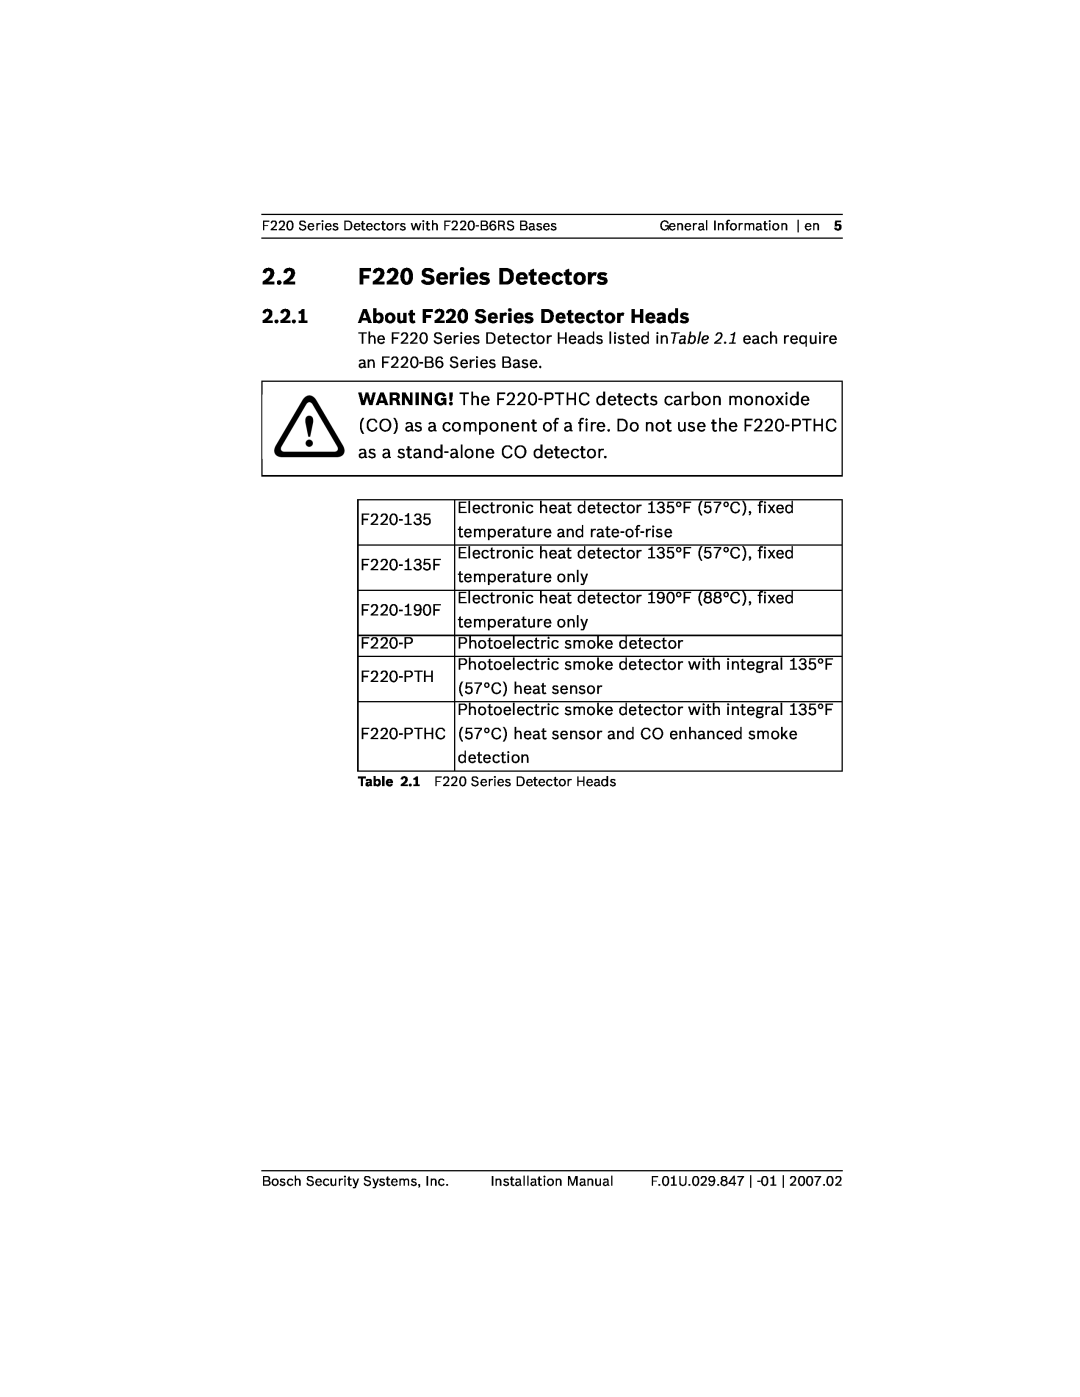 Bosch Appliances F220-B6RS installation manual 2.2F220 Series Detectors, 2.2.1About F220 Series Detector Heads 